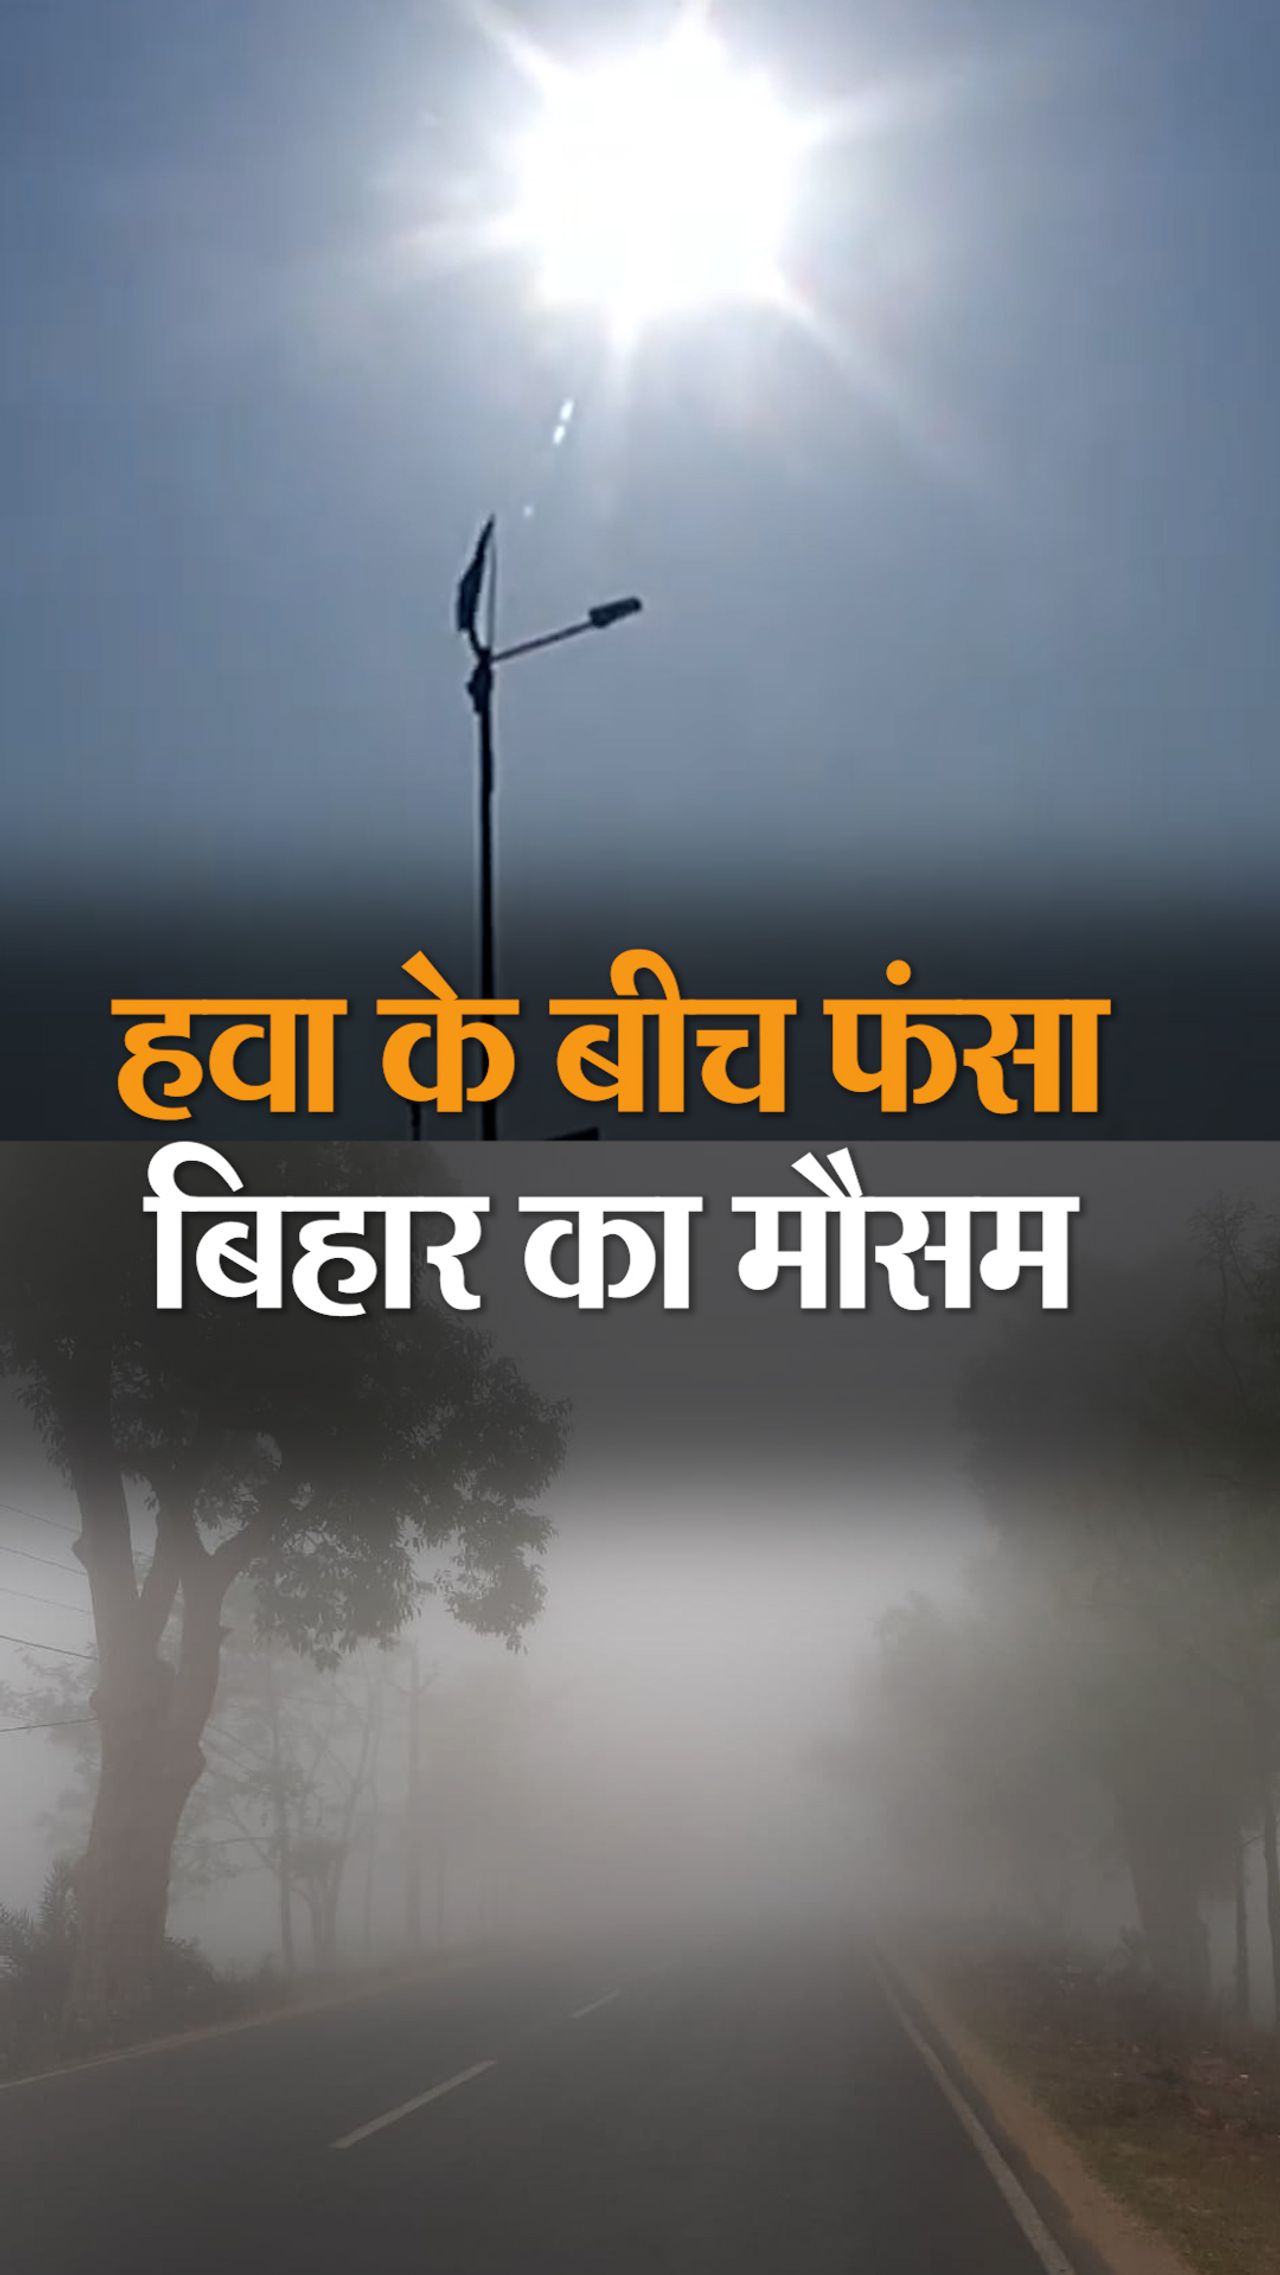 Two types of weather in Bihar due to the effect of wind